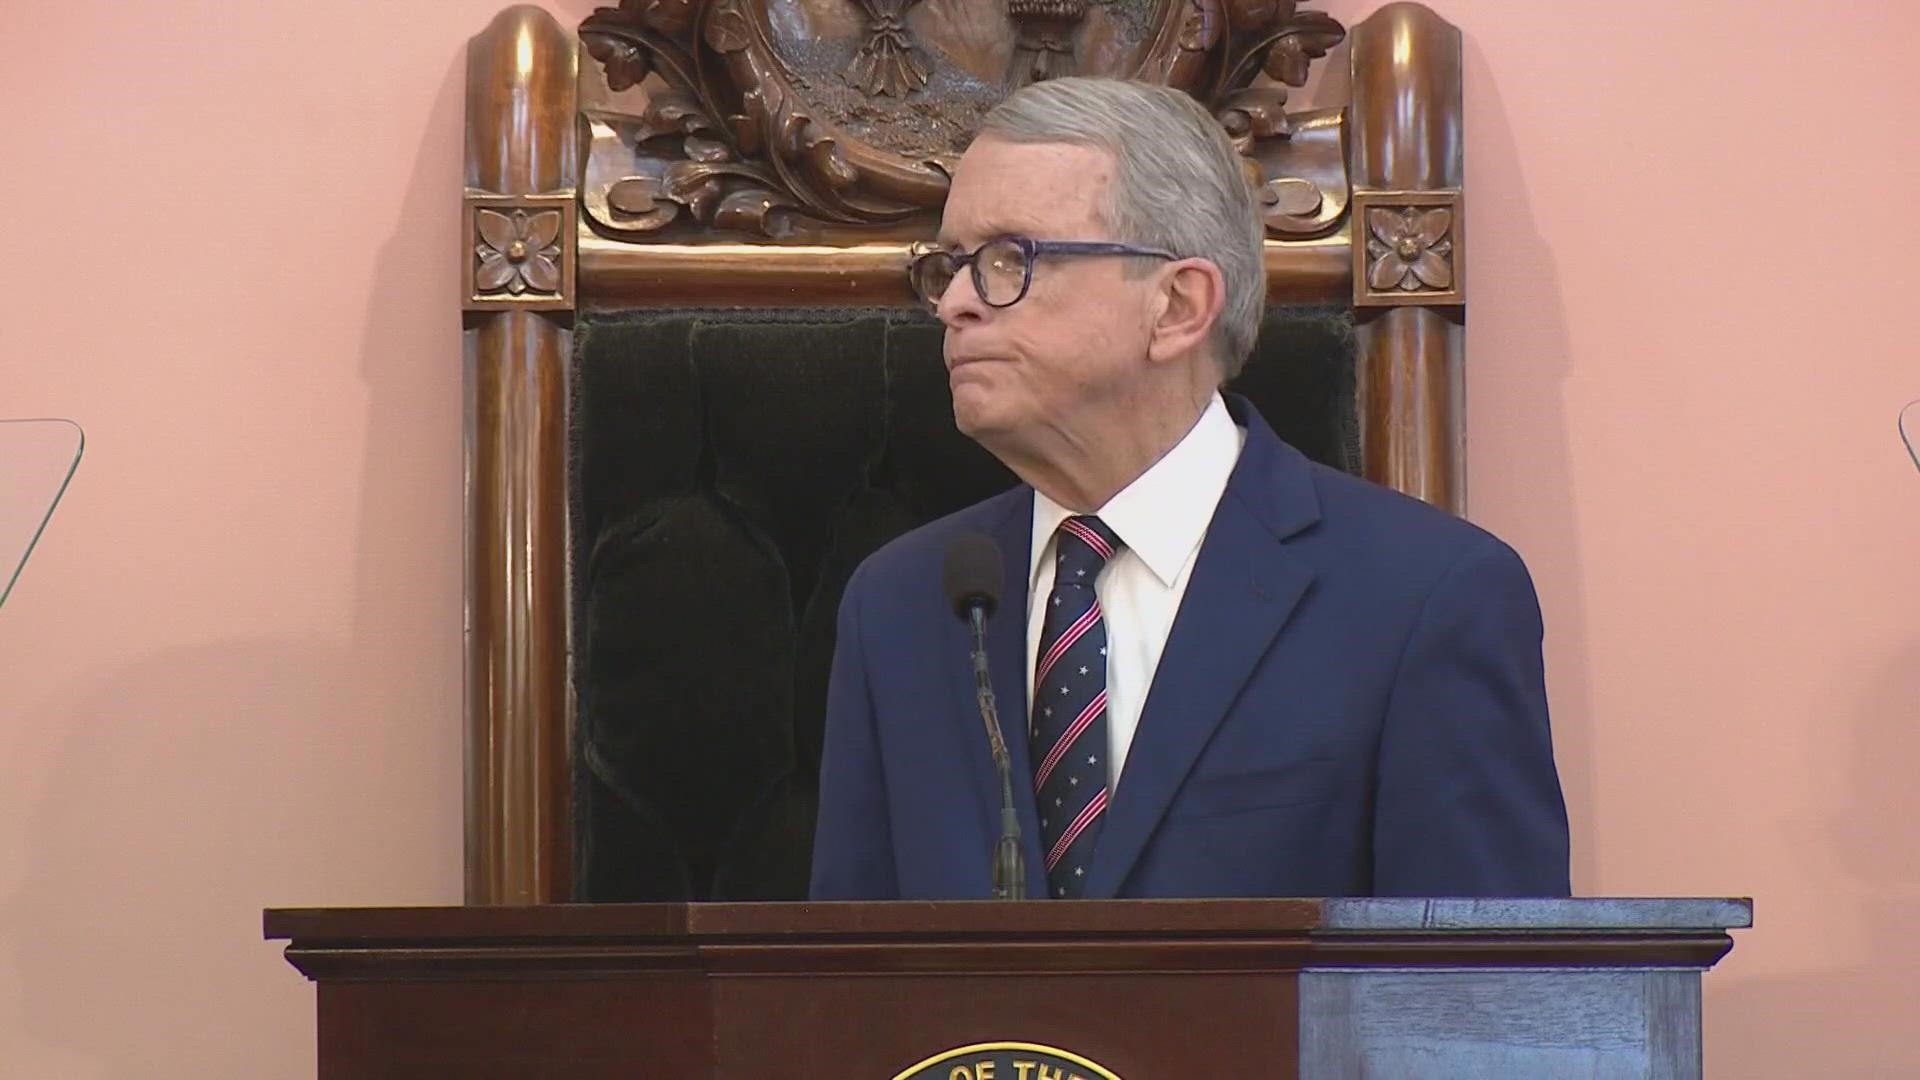 Gov. DeWine delivered his State of the State address on Tuesday.